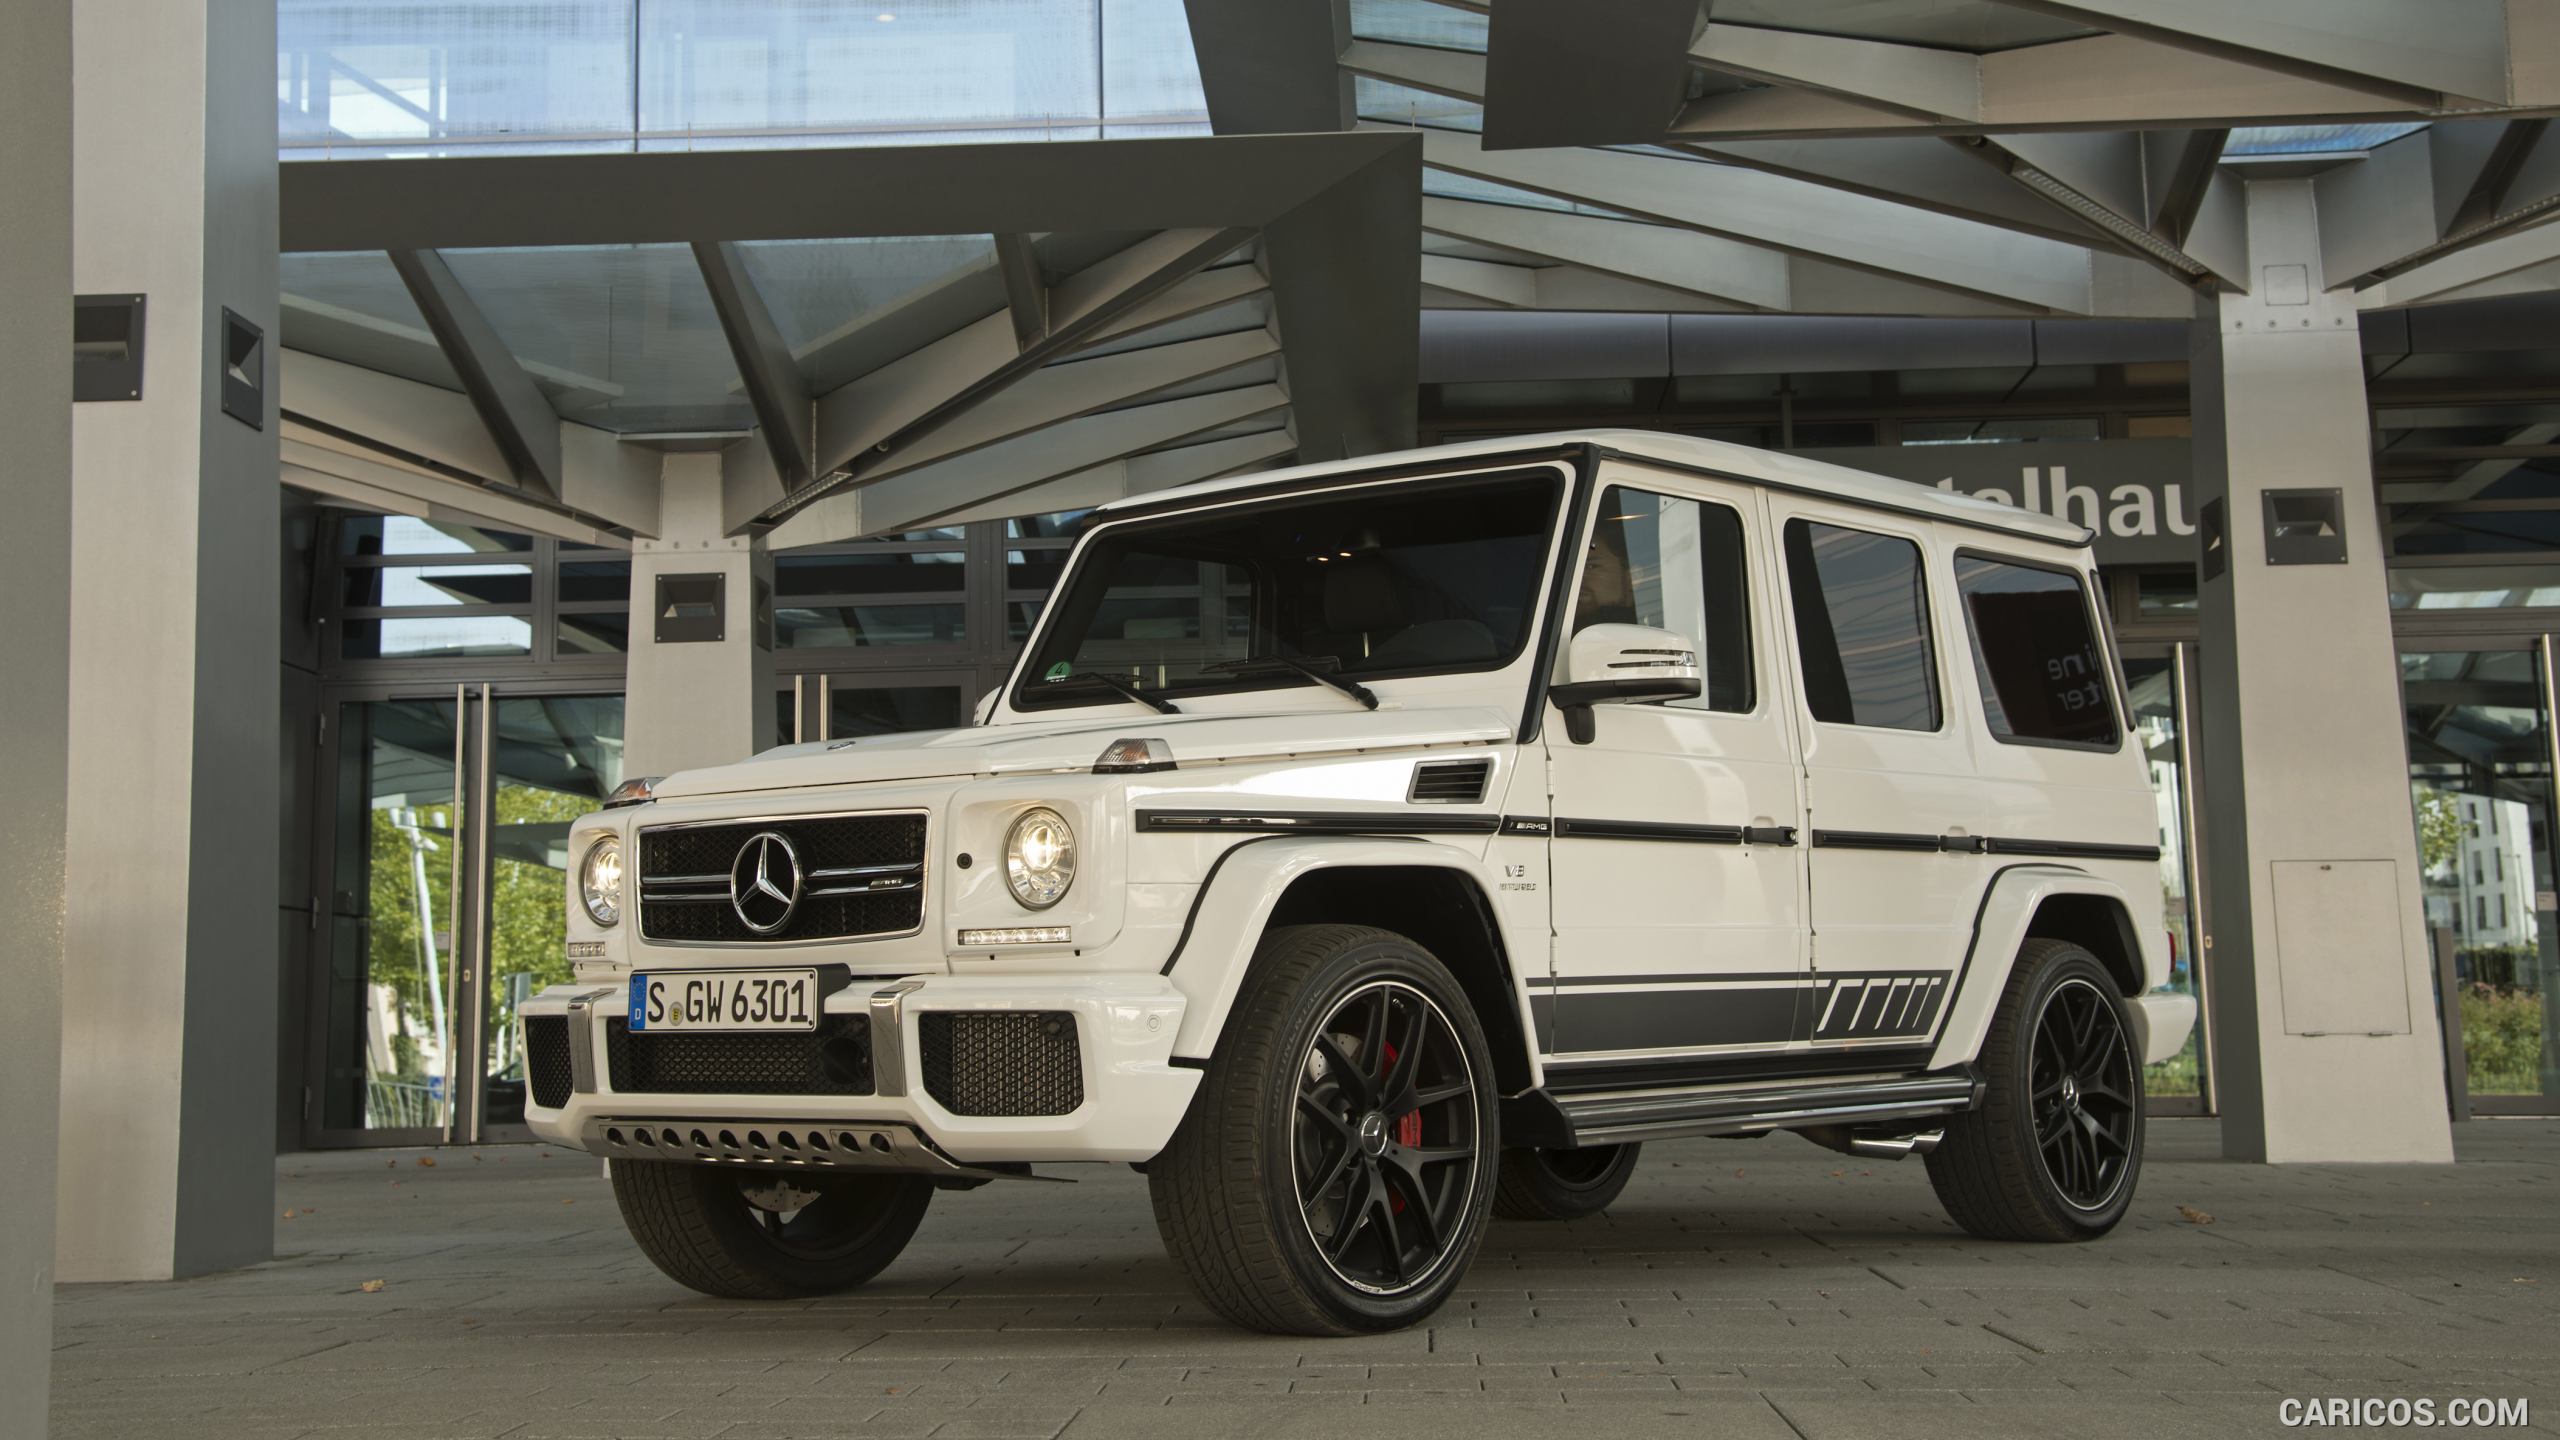 2016 Mercedes-AMG G63 AMG EDITION 463 in Polarwhite - Front, #40 of 48